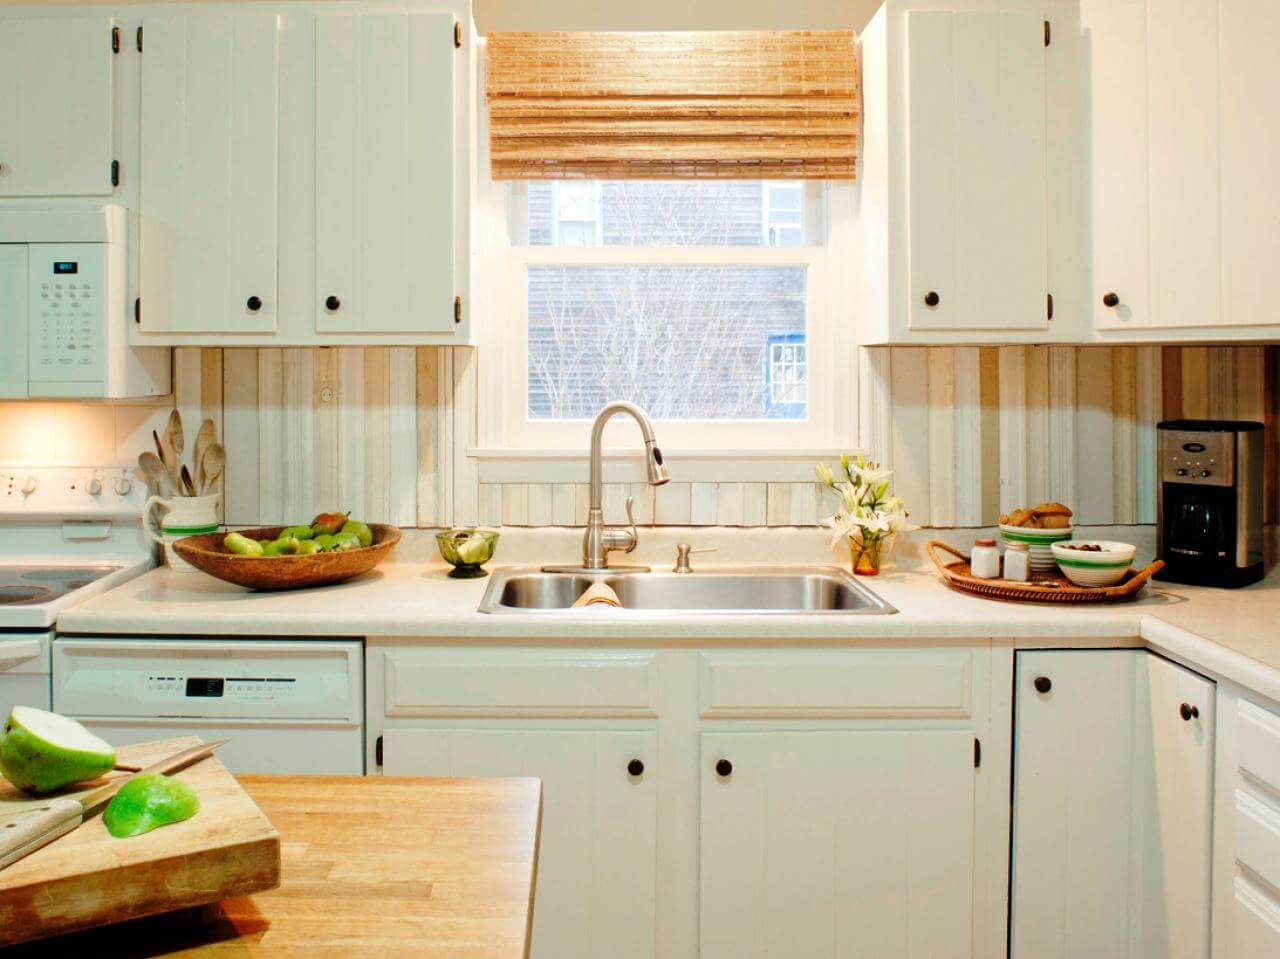 Adorable kitchen cabinet that has been redesigned